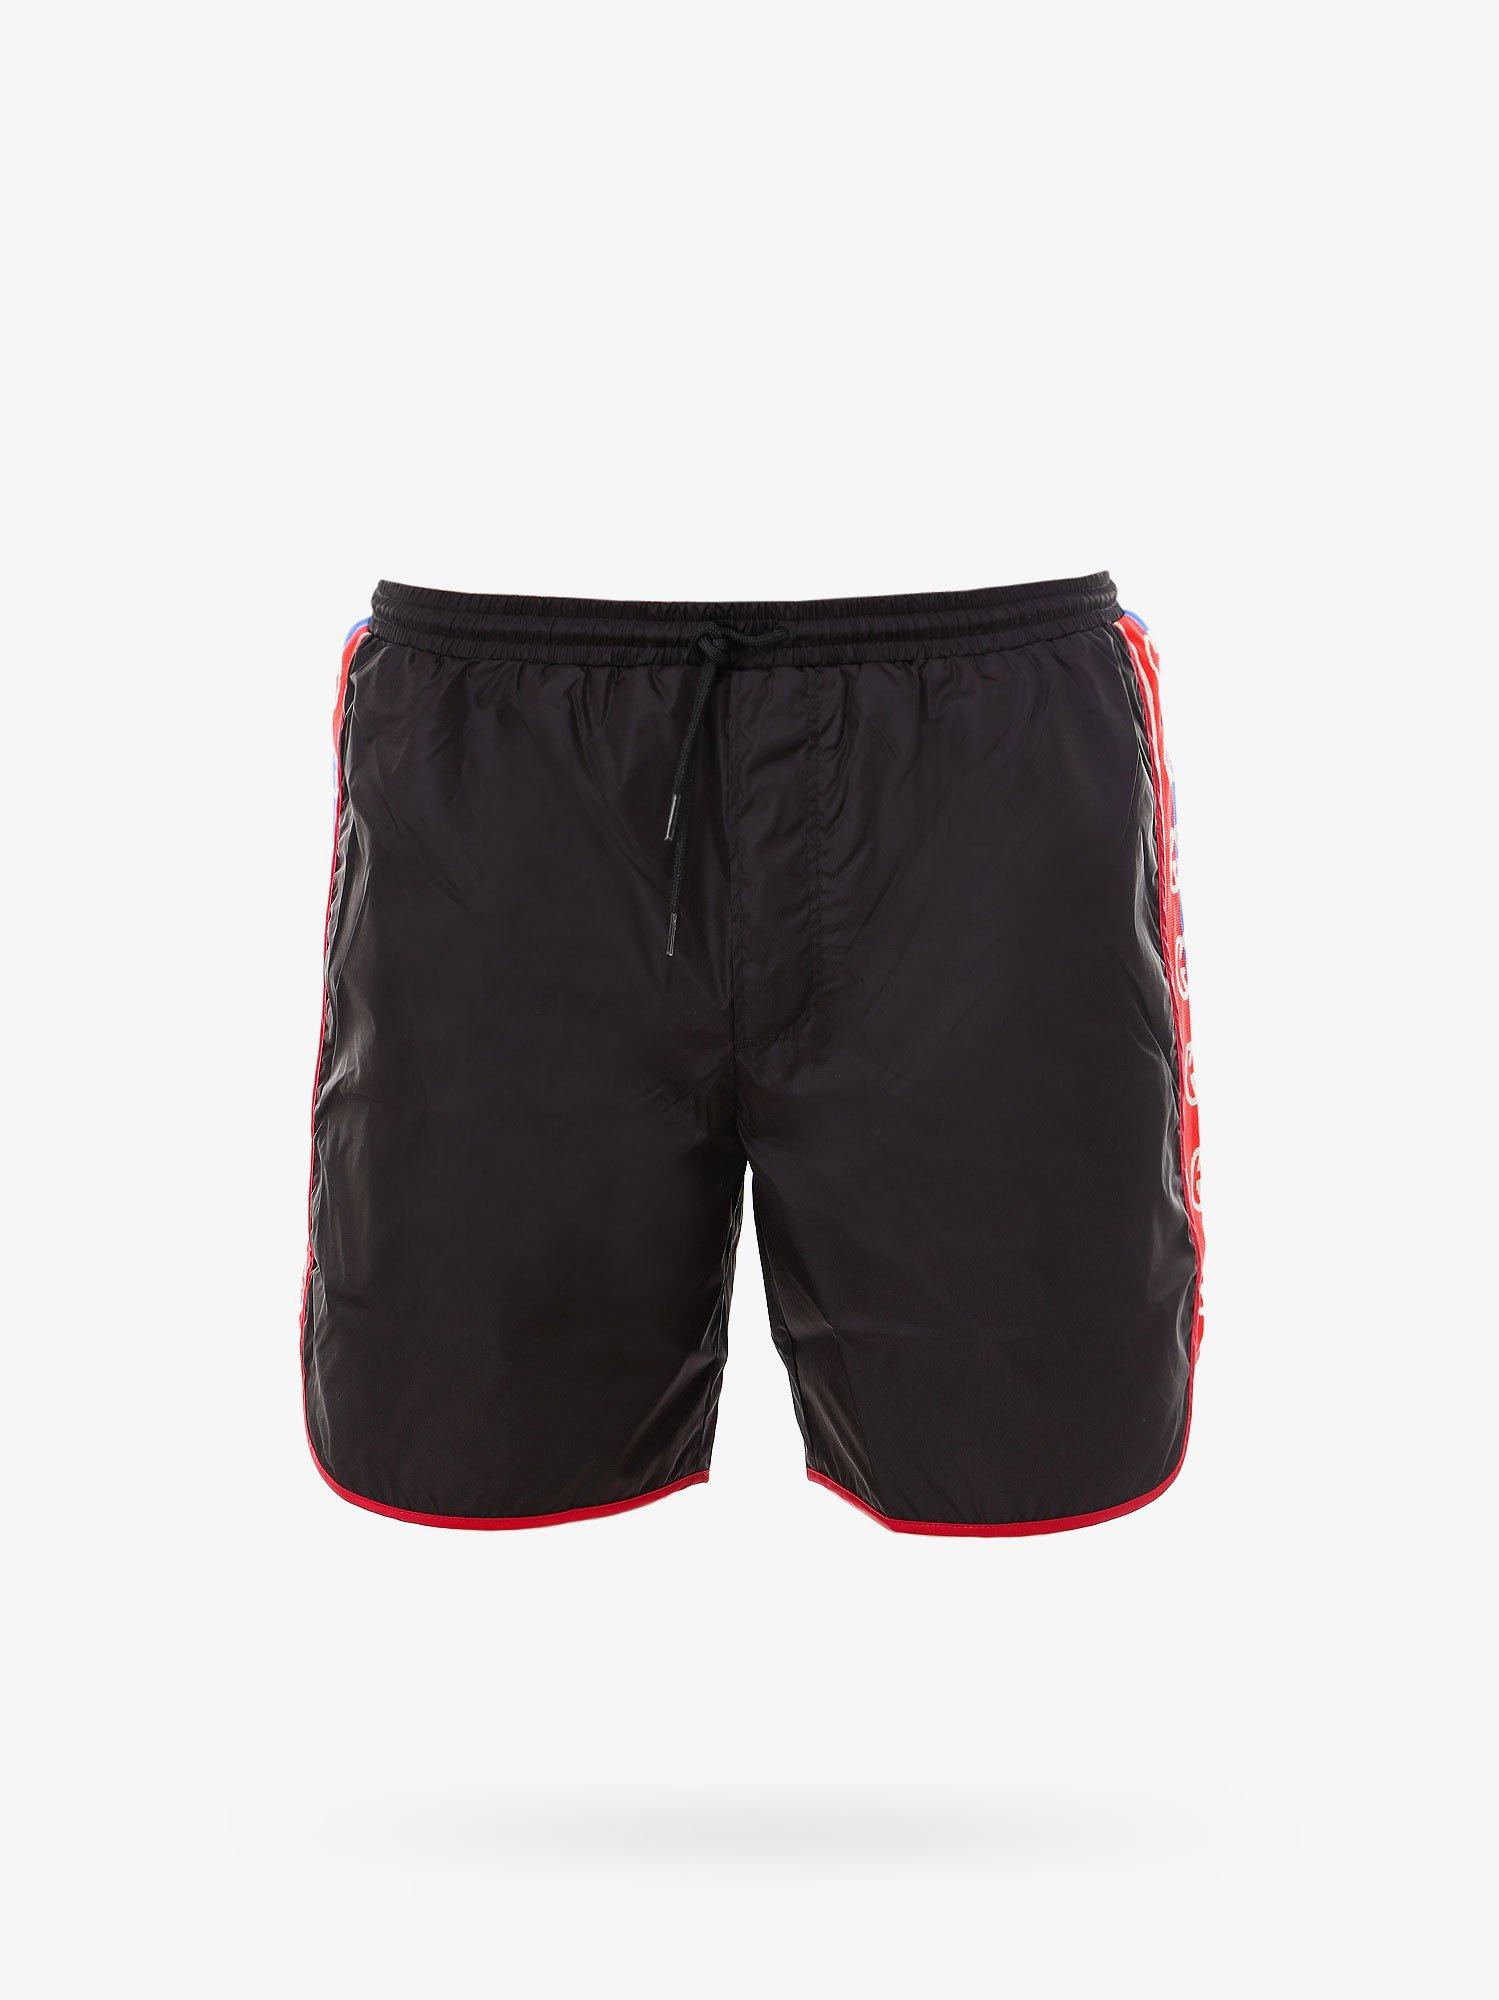 Gucci Synthetic Swim Trunks in Black for Men - Lyst